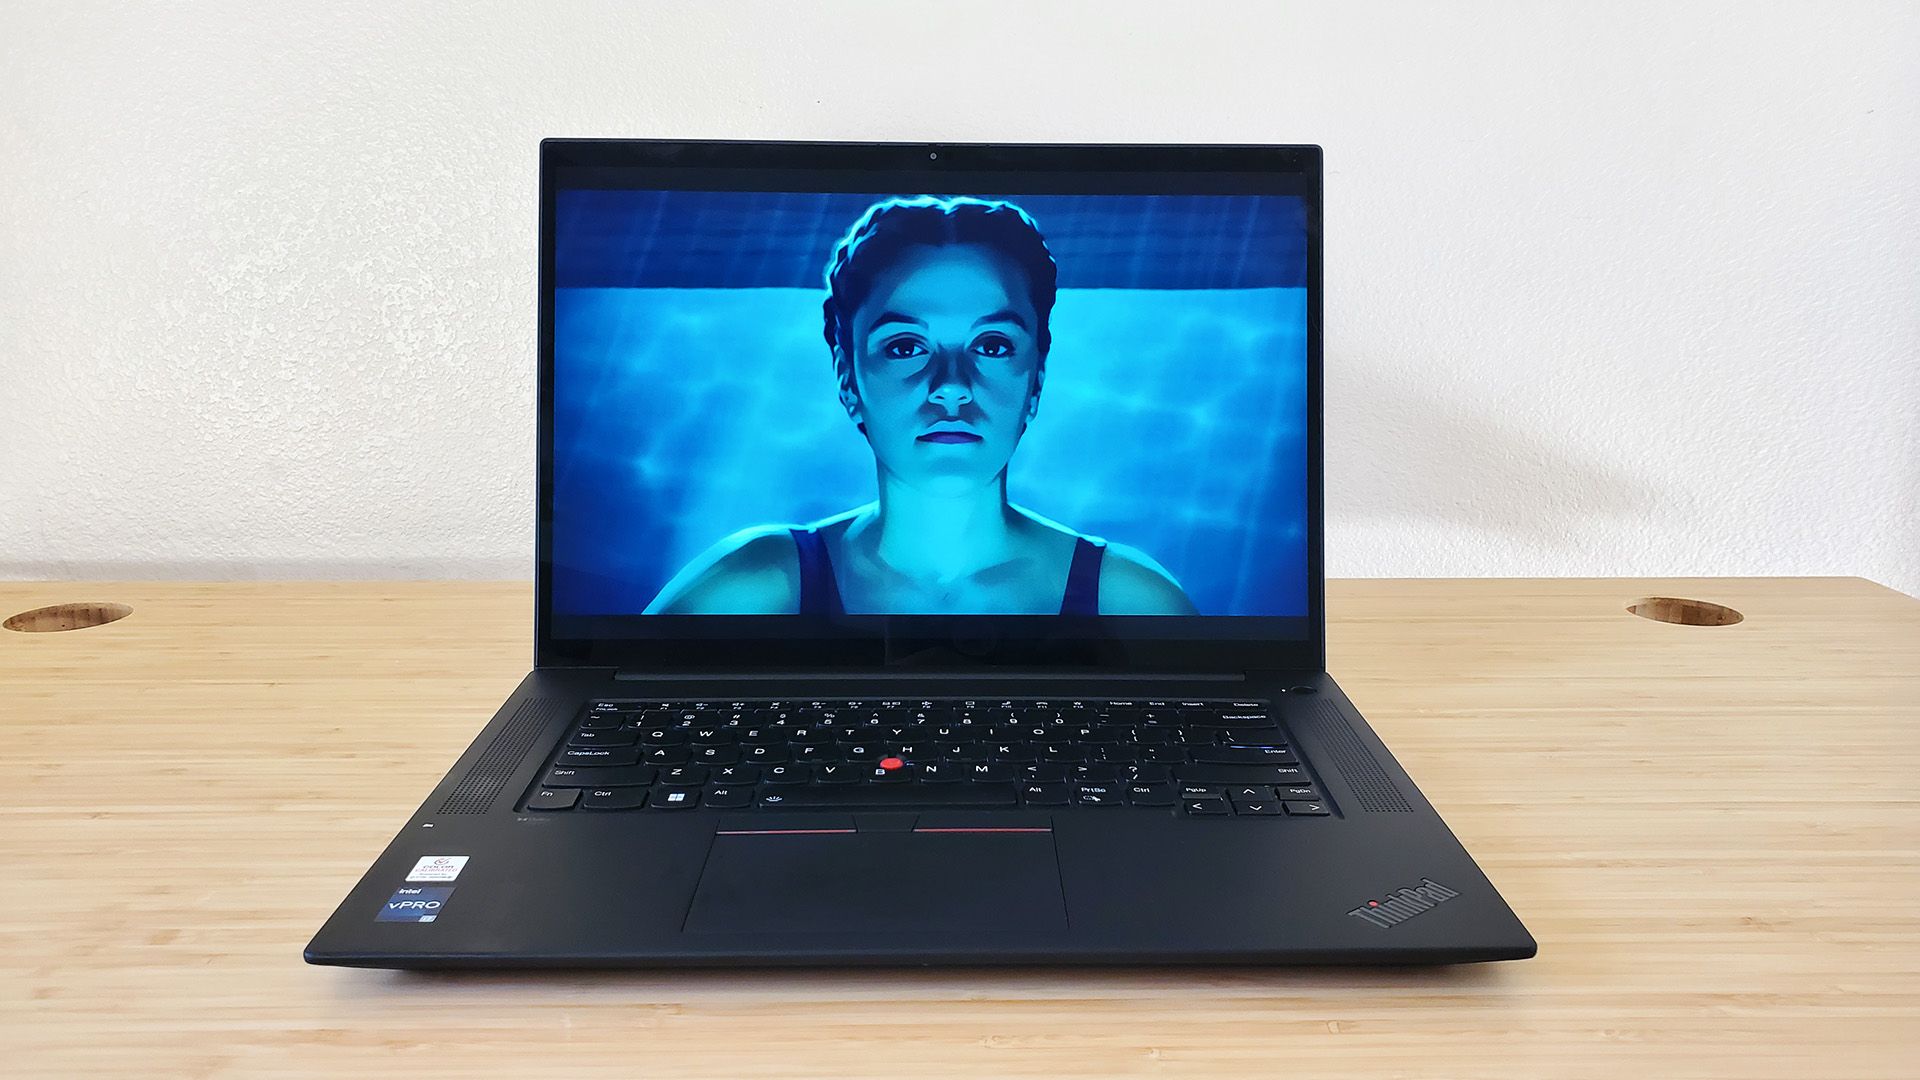 The Lenovo ThinkPad X1 Extreme Gen 5 laptop sitting on a desk playing a video game intro.